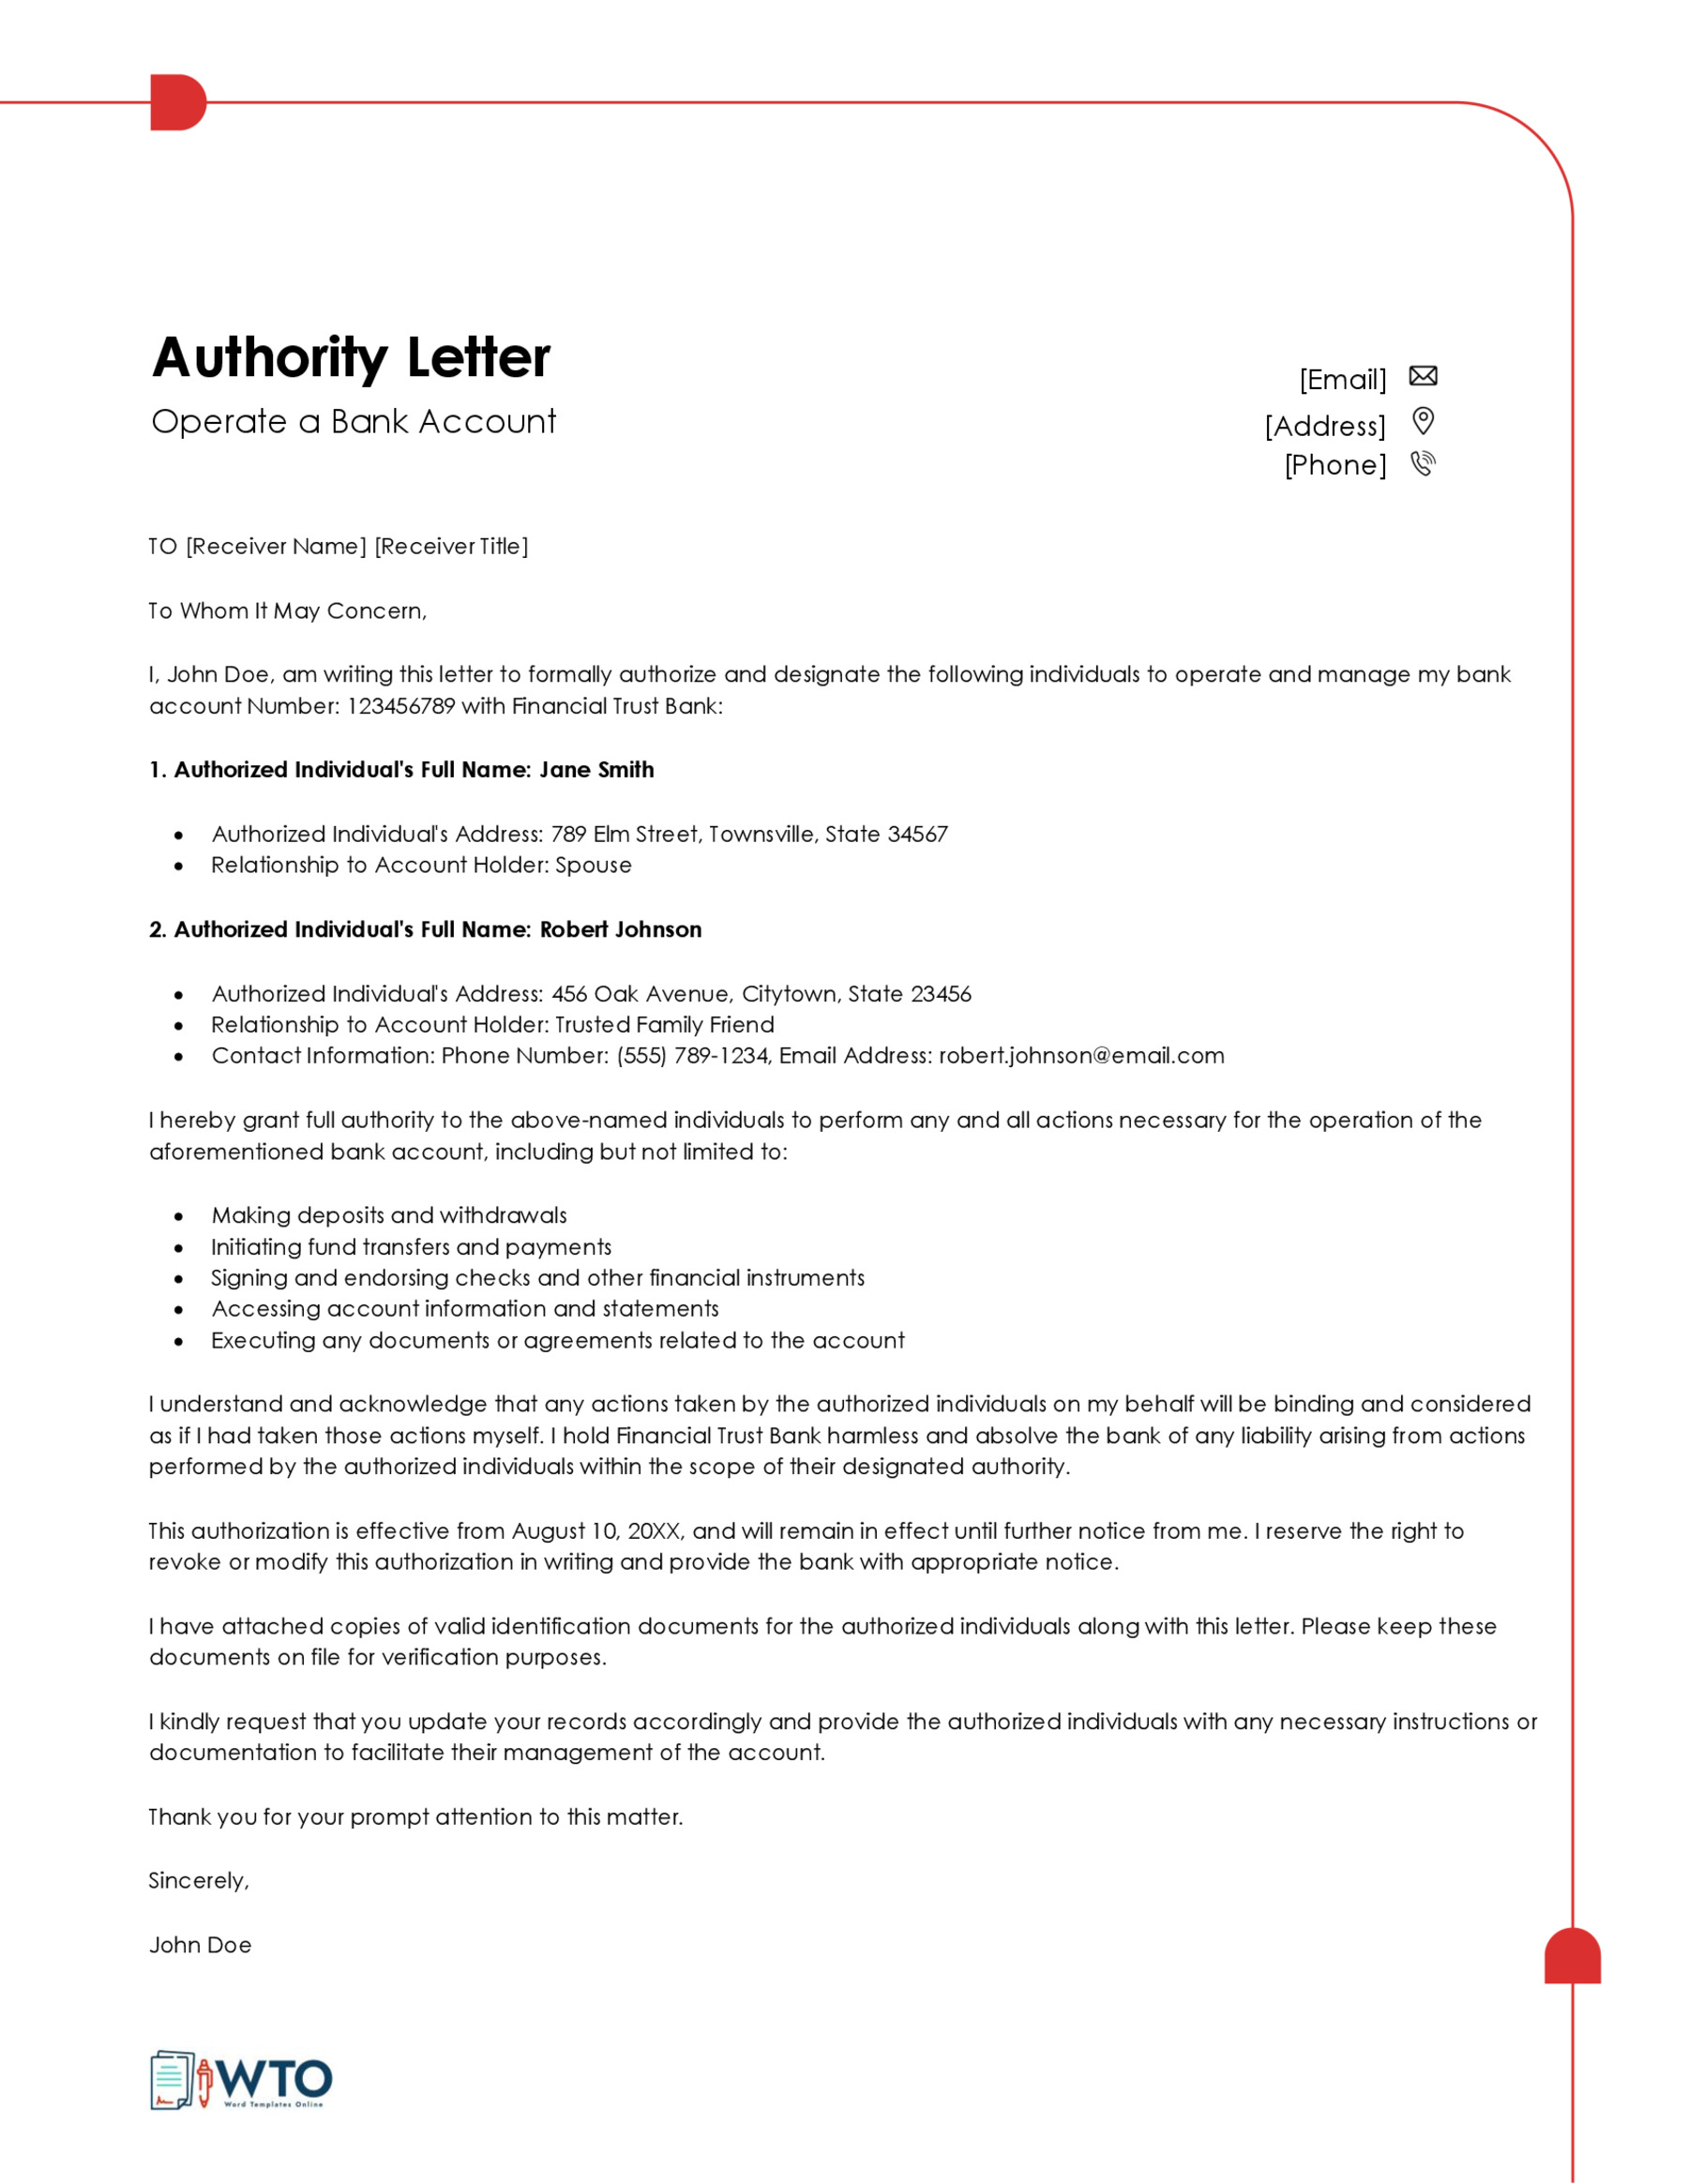 Authorization Letter to Operate a Bank Account sample-Free Download